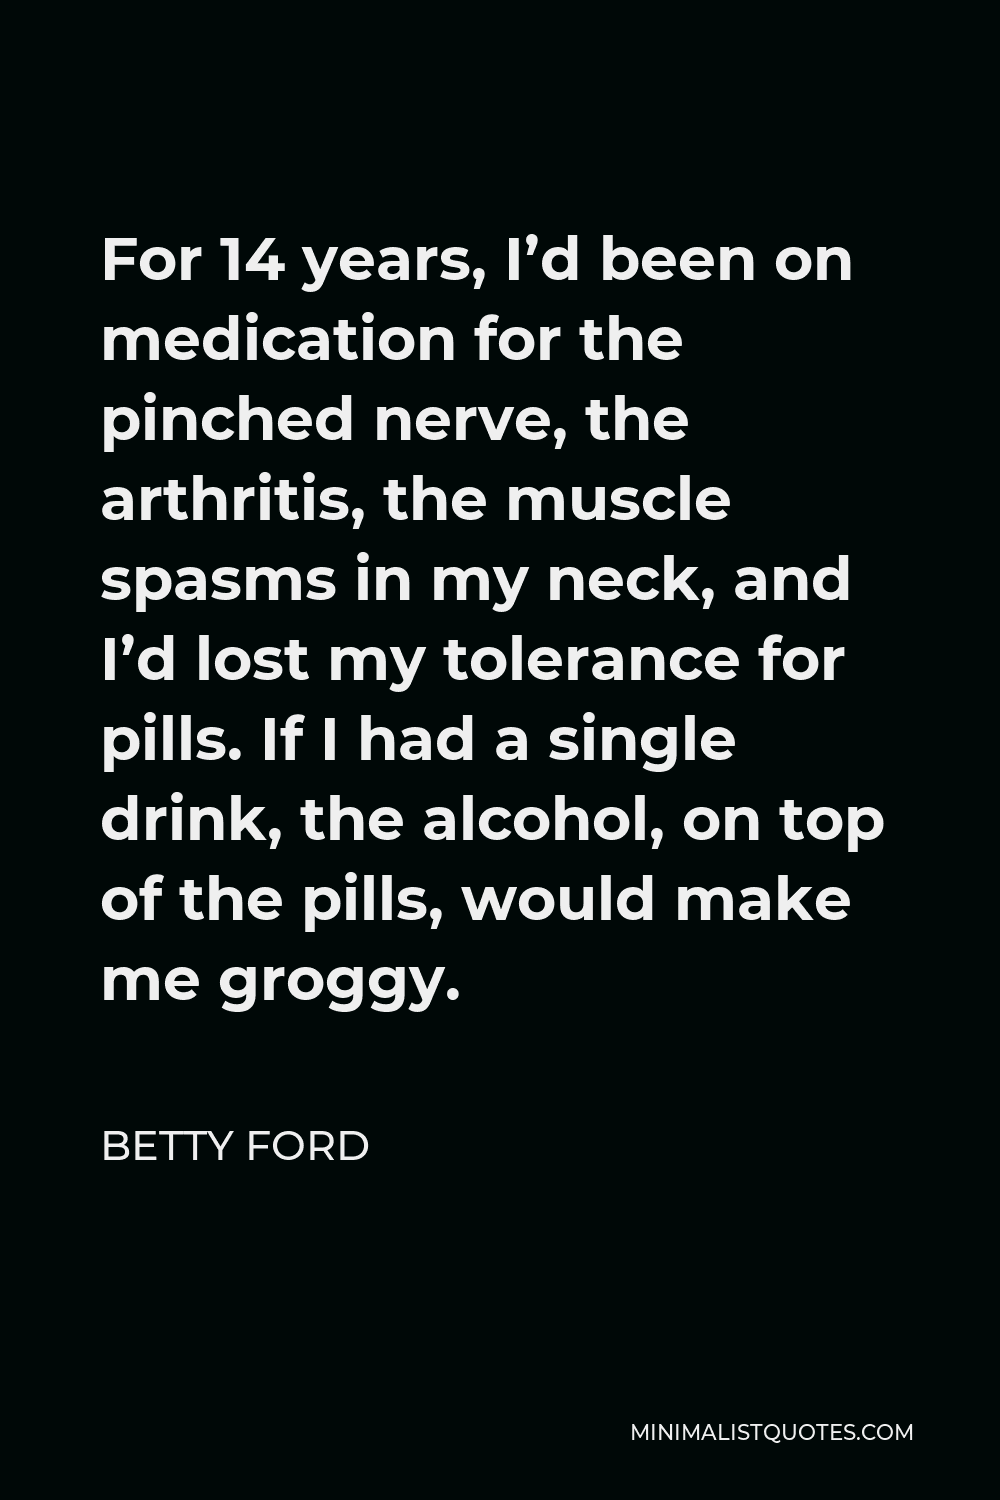 Betty Ford Quote - For 14 years, I’d been on medication for the pinched nerve, the arthritis, the muscle spasms in my neck, and I’d lost my tolerance for pills. If I had a single drink, the alcohol, on top of the pills, would make me groggy.